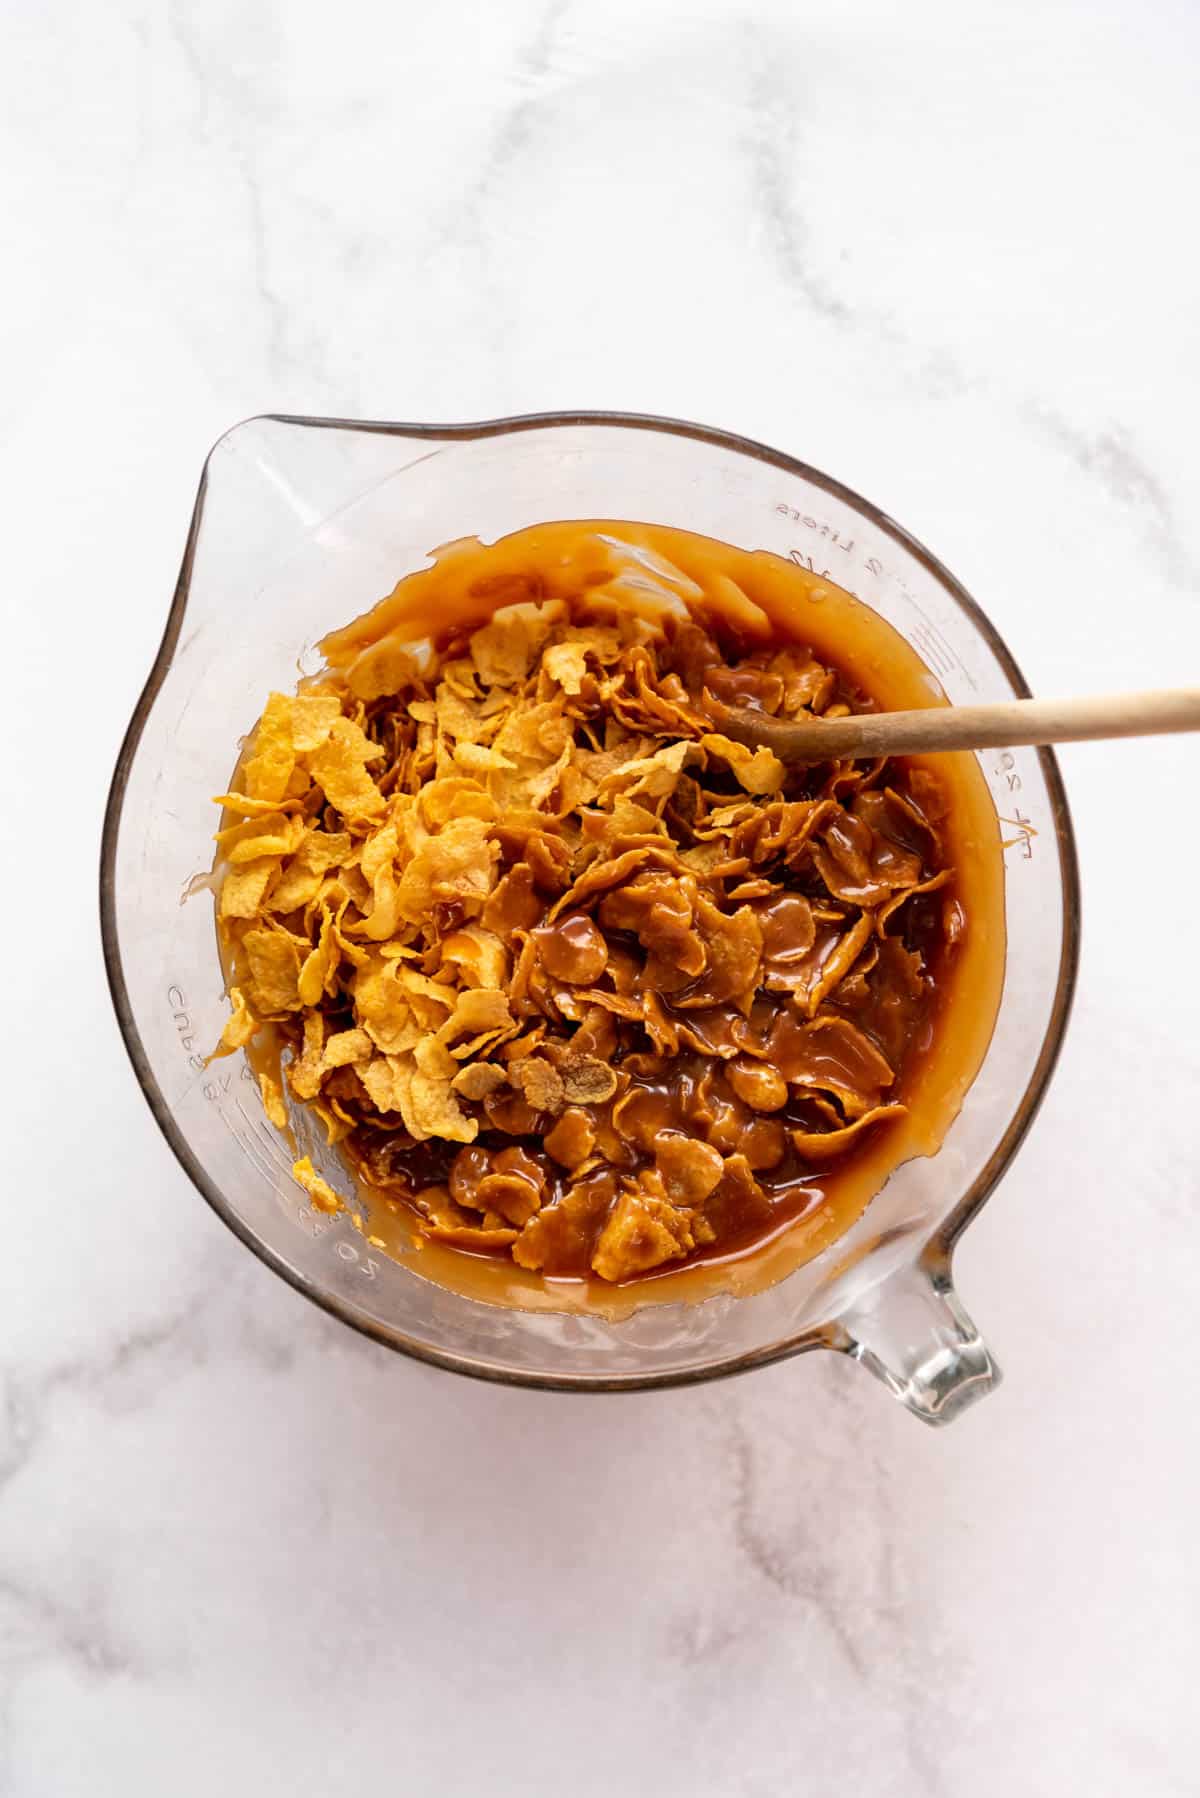 Stirring cornflakes and homemade caramel together in a large white bowl.